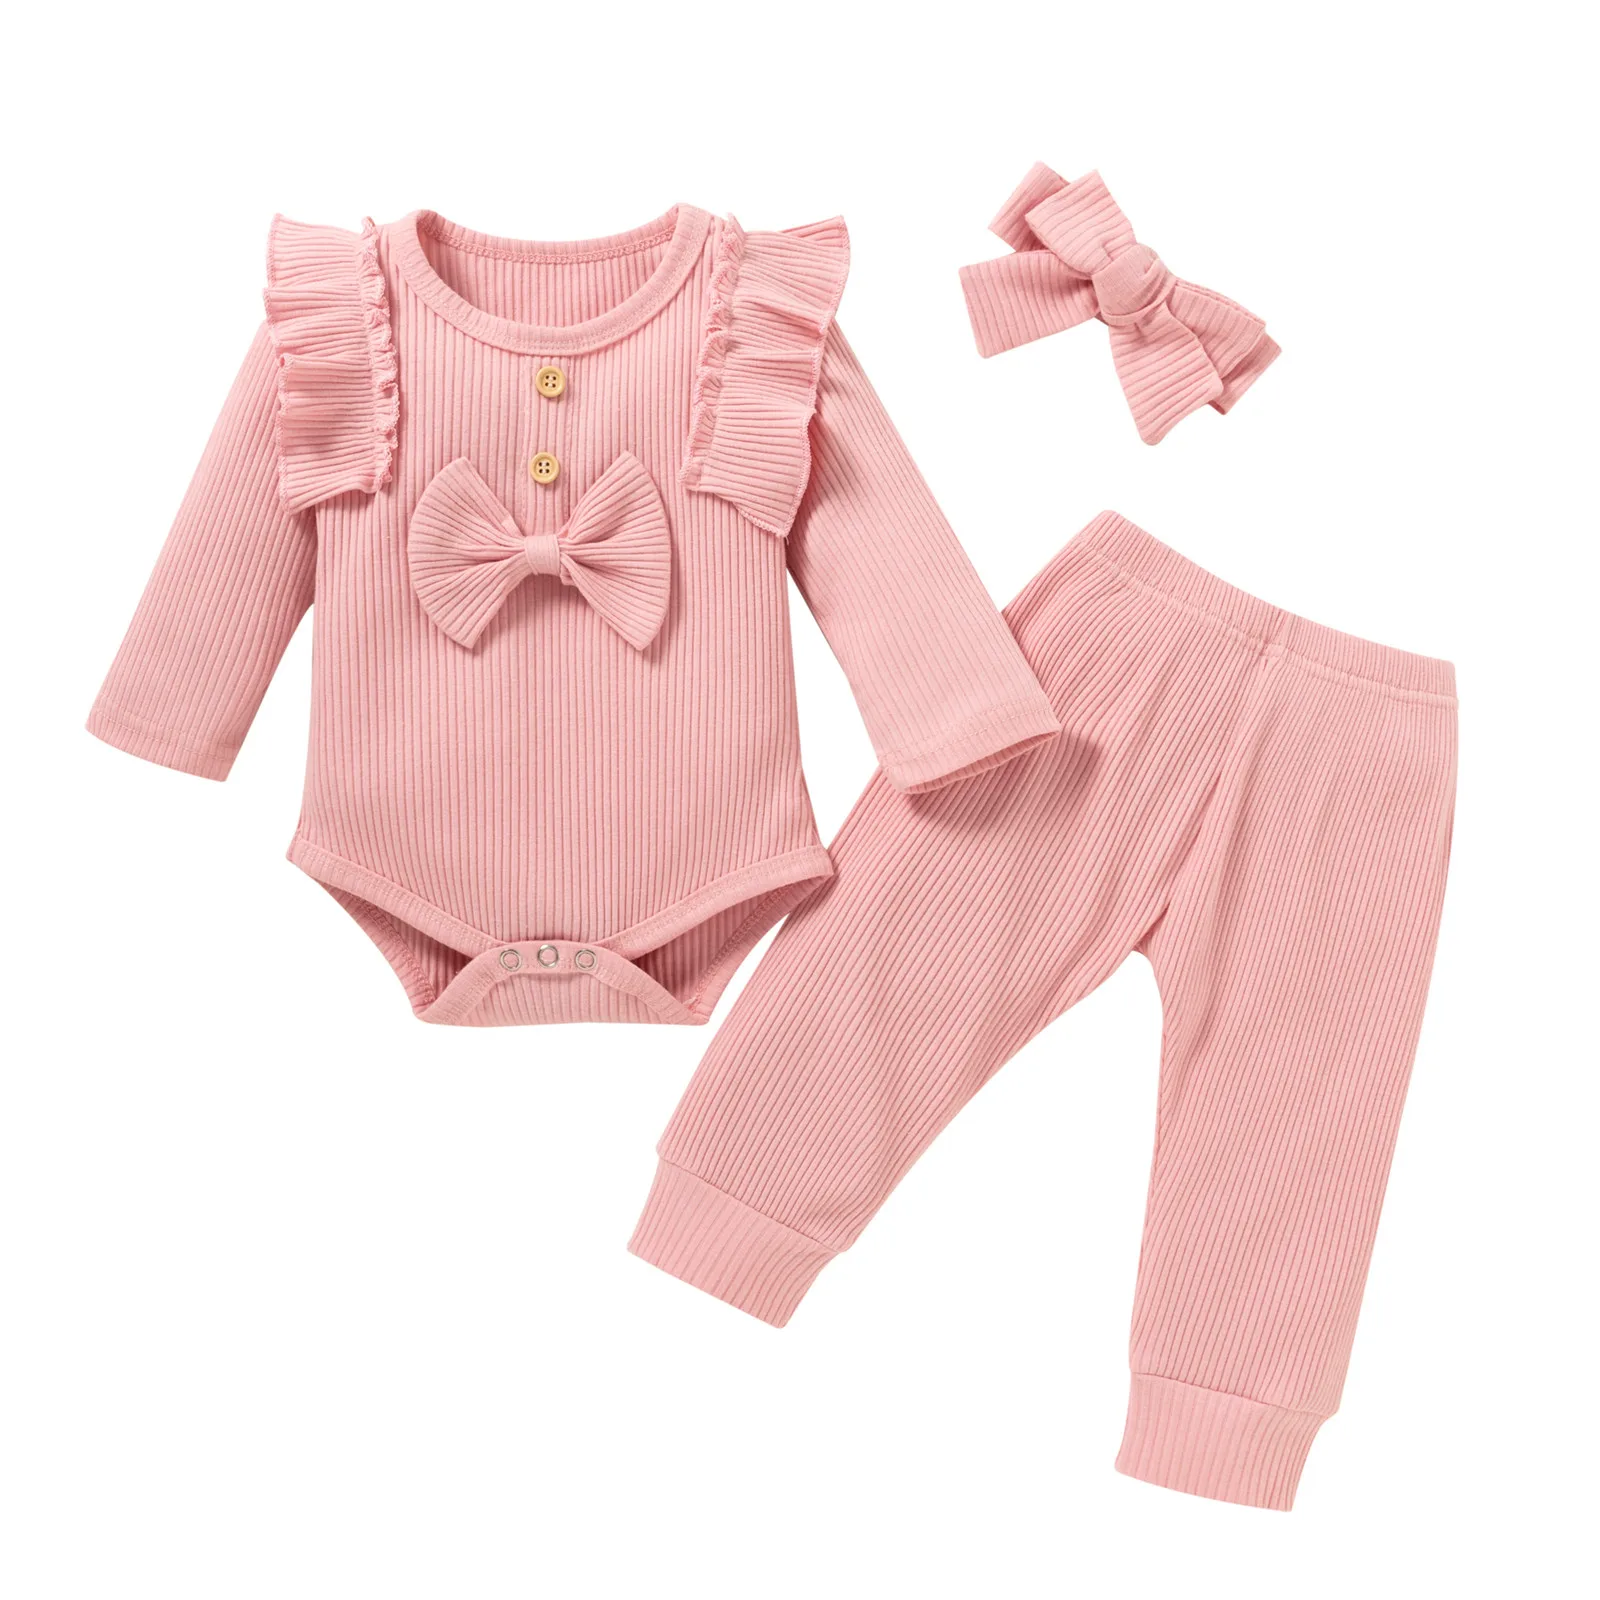 Baby Clothing Set best of sale Newborn Infant Baby Girls Solid Ruffled Ribbed Bow Romper+Pants Outfits Set Winter Warm Toddler Baby Girls Smooth Velvet Outfits baby girl cotton clothing set